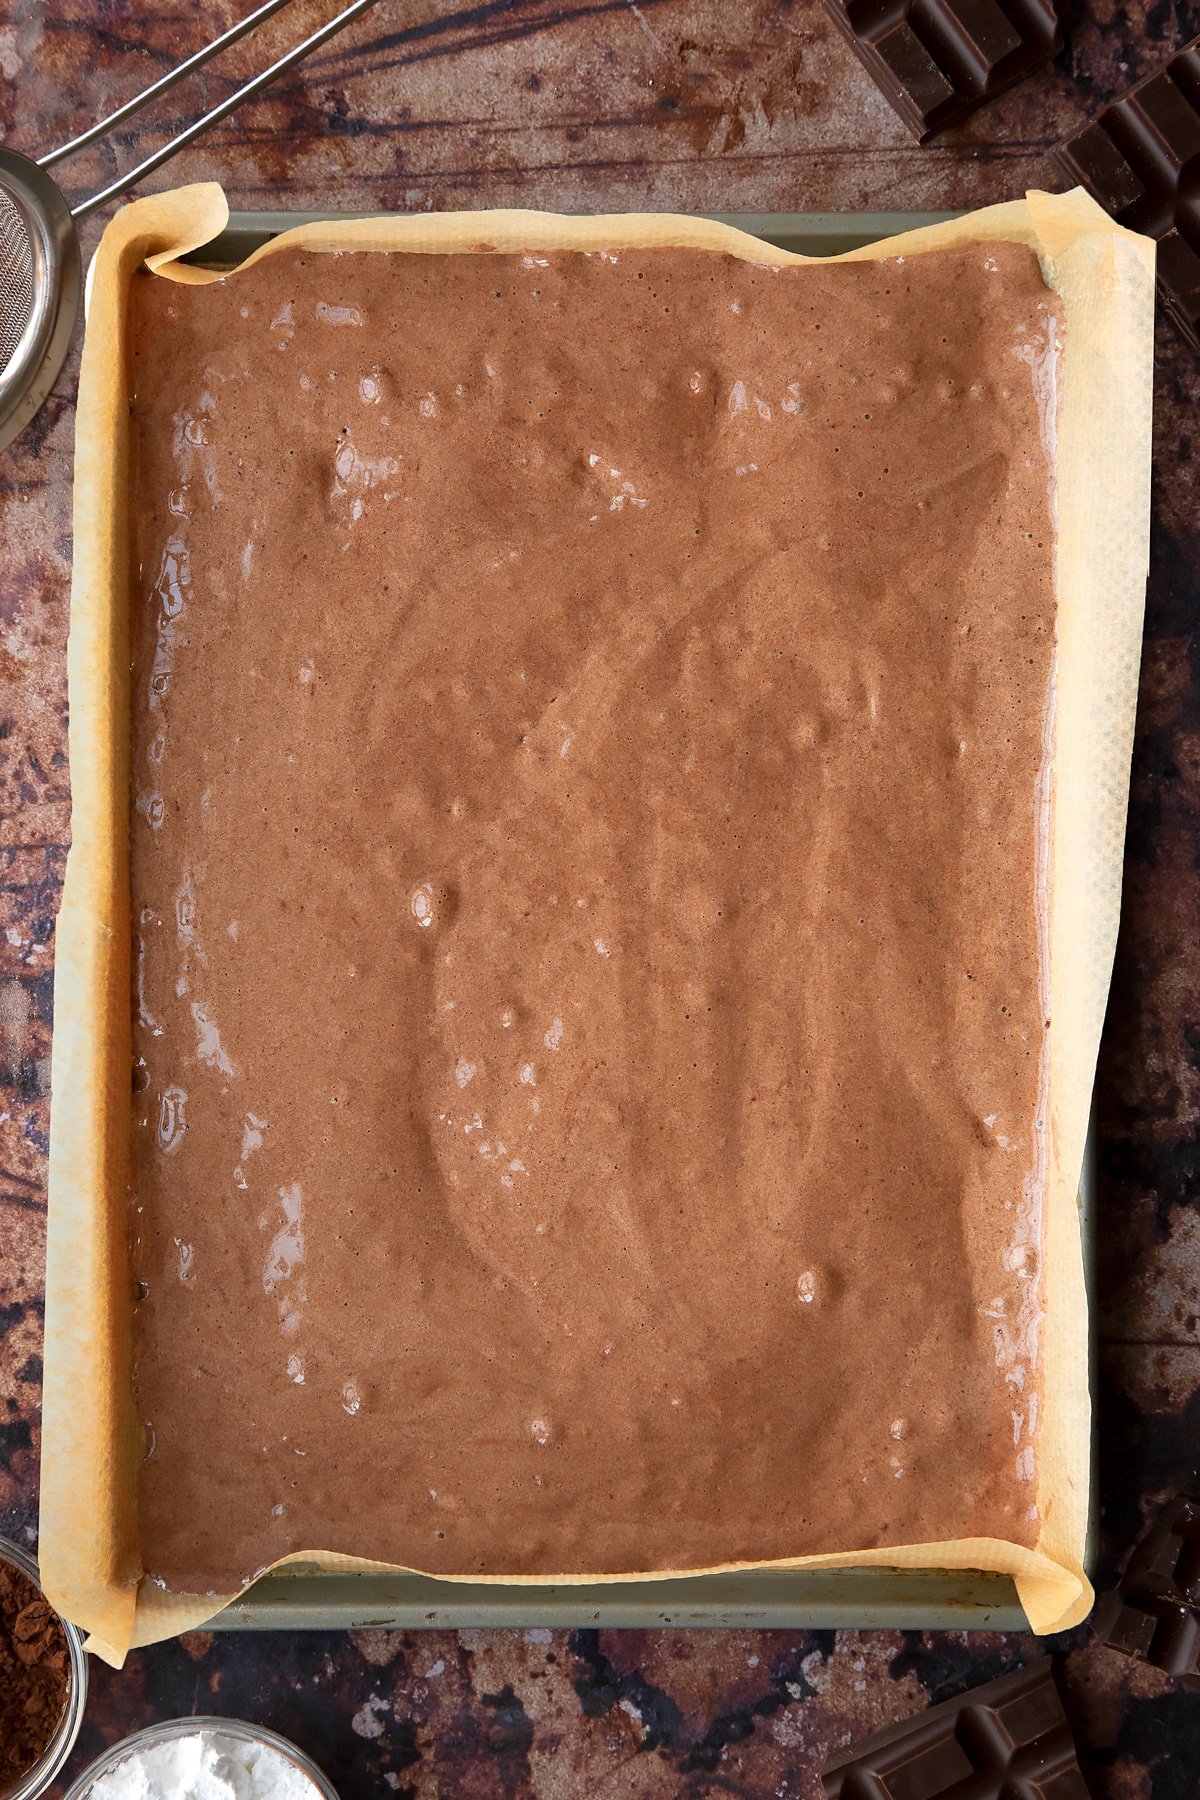 Chocolate sponge batter in a lined Swiss roll tray.